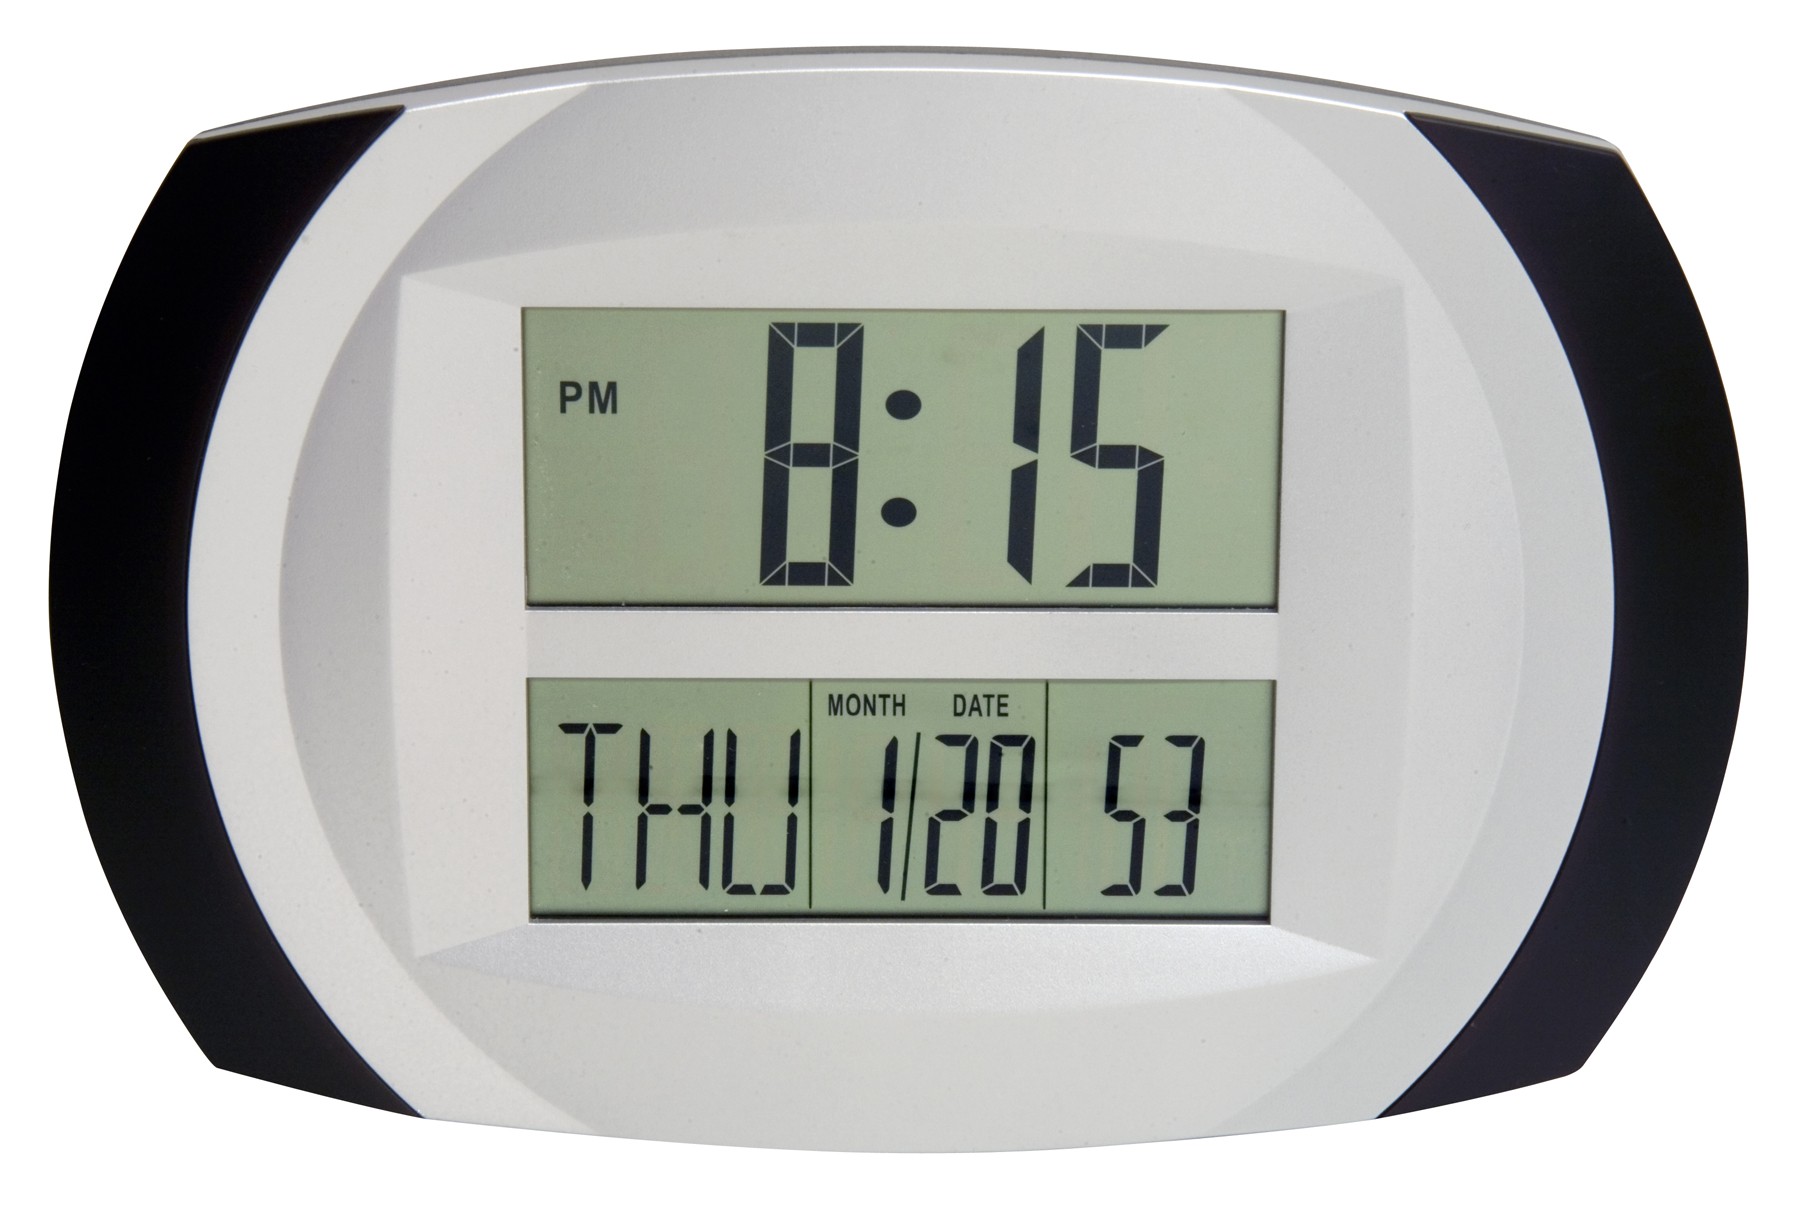 SP Bel-Art, H-B DURAC Multi-Function Digital Clock with Calendar, 0 to 50C Thermometer and Alarm